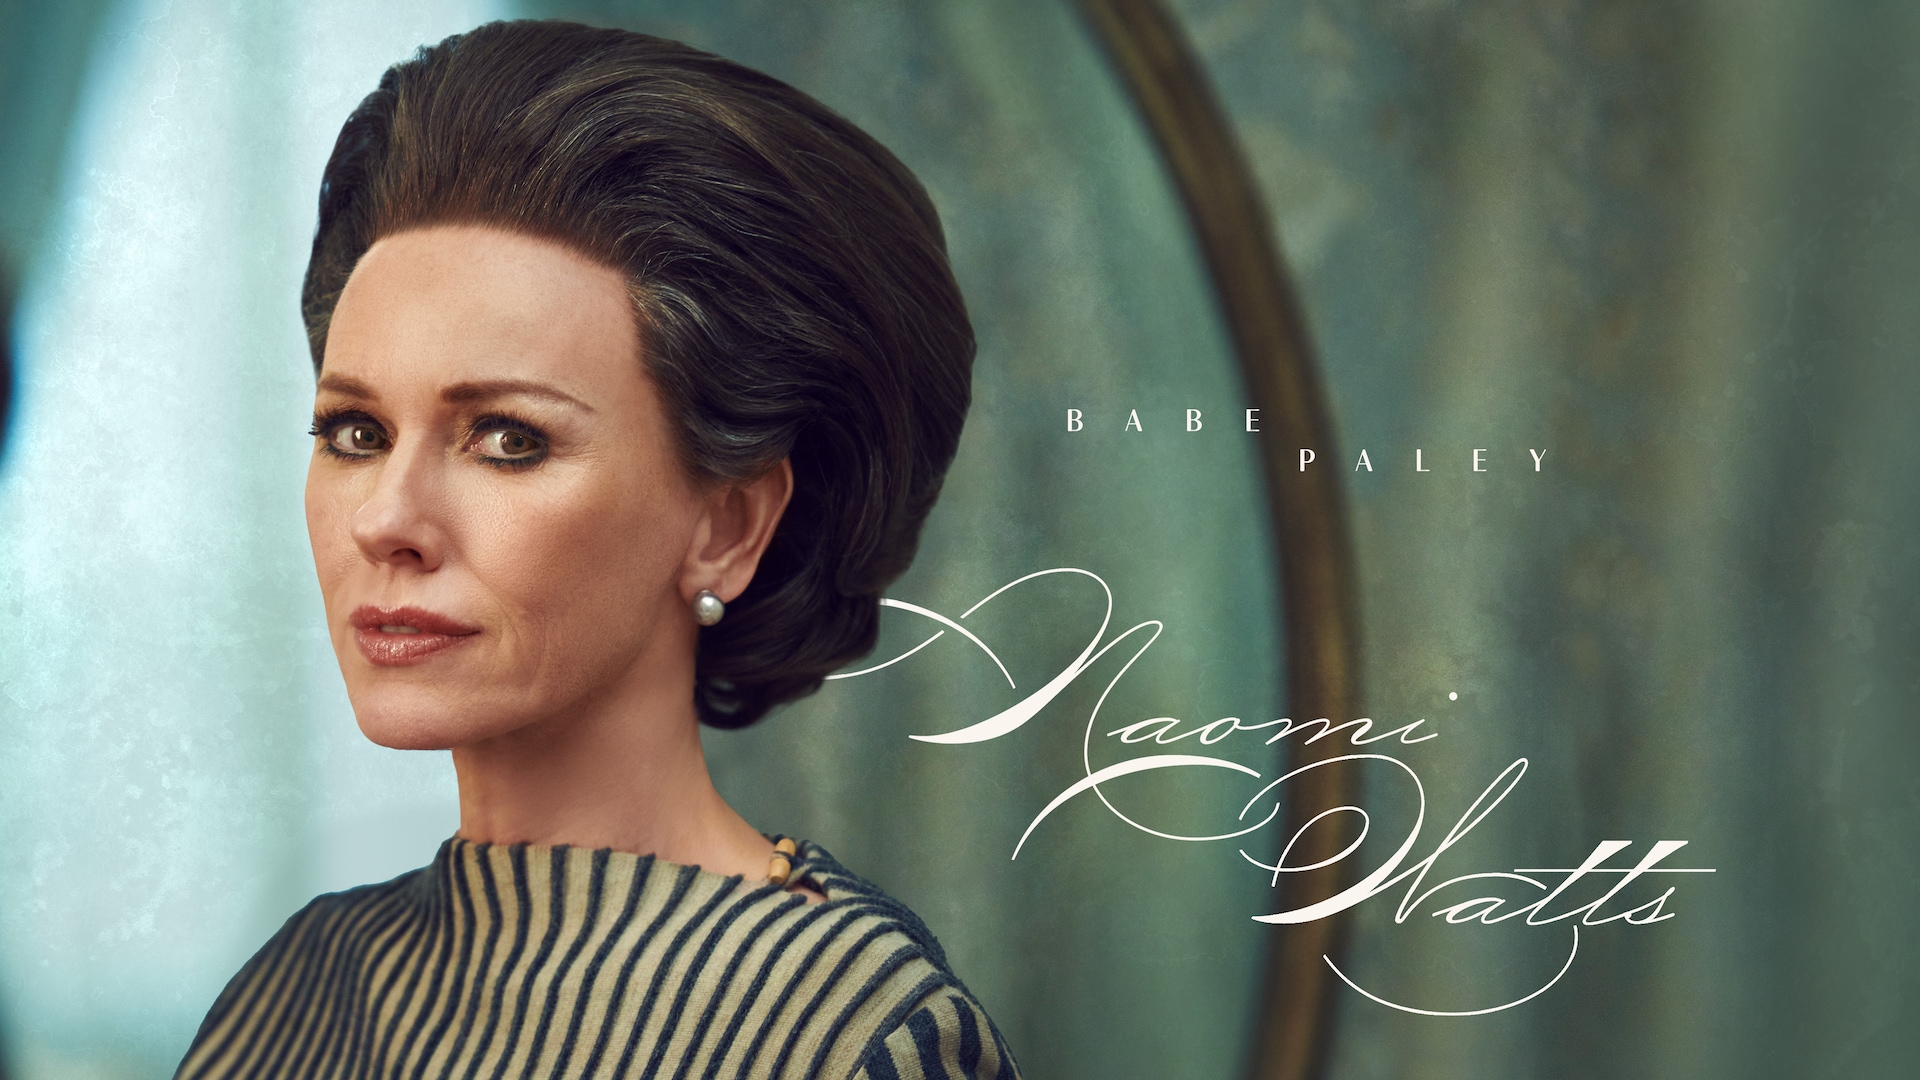 Naomi Watts as Babe Paley in FEUD